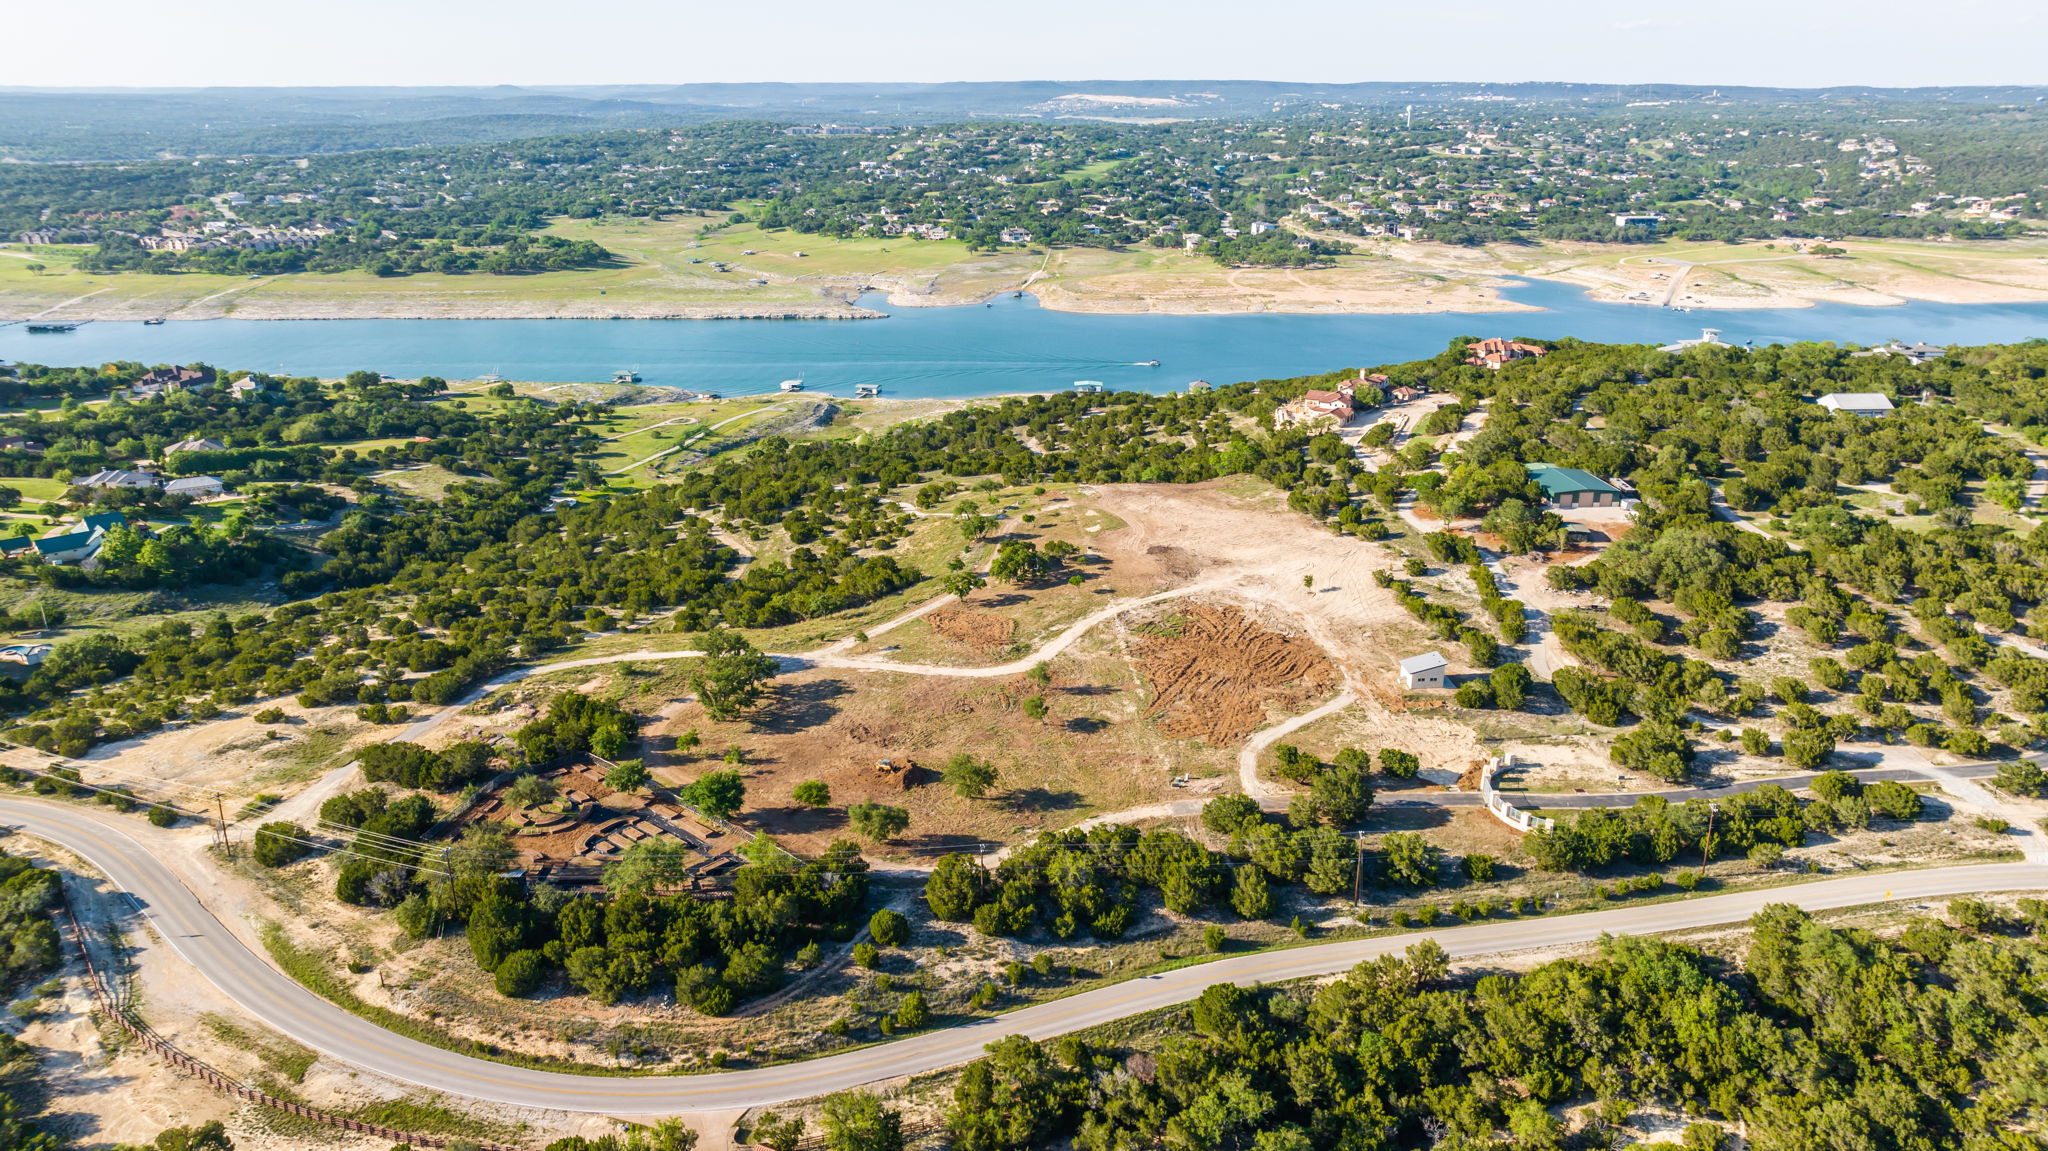 Aerial view looking towards Lago Vista across the lake. The open land area is part of the 23.85 acres. Beautiful setting for a new homesite!